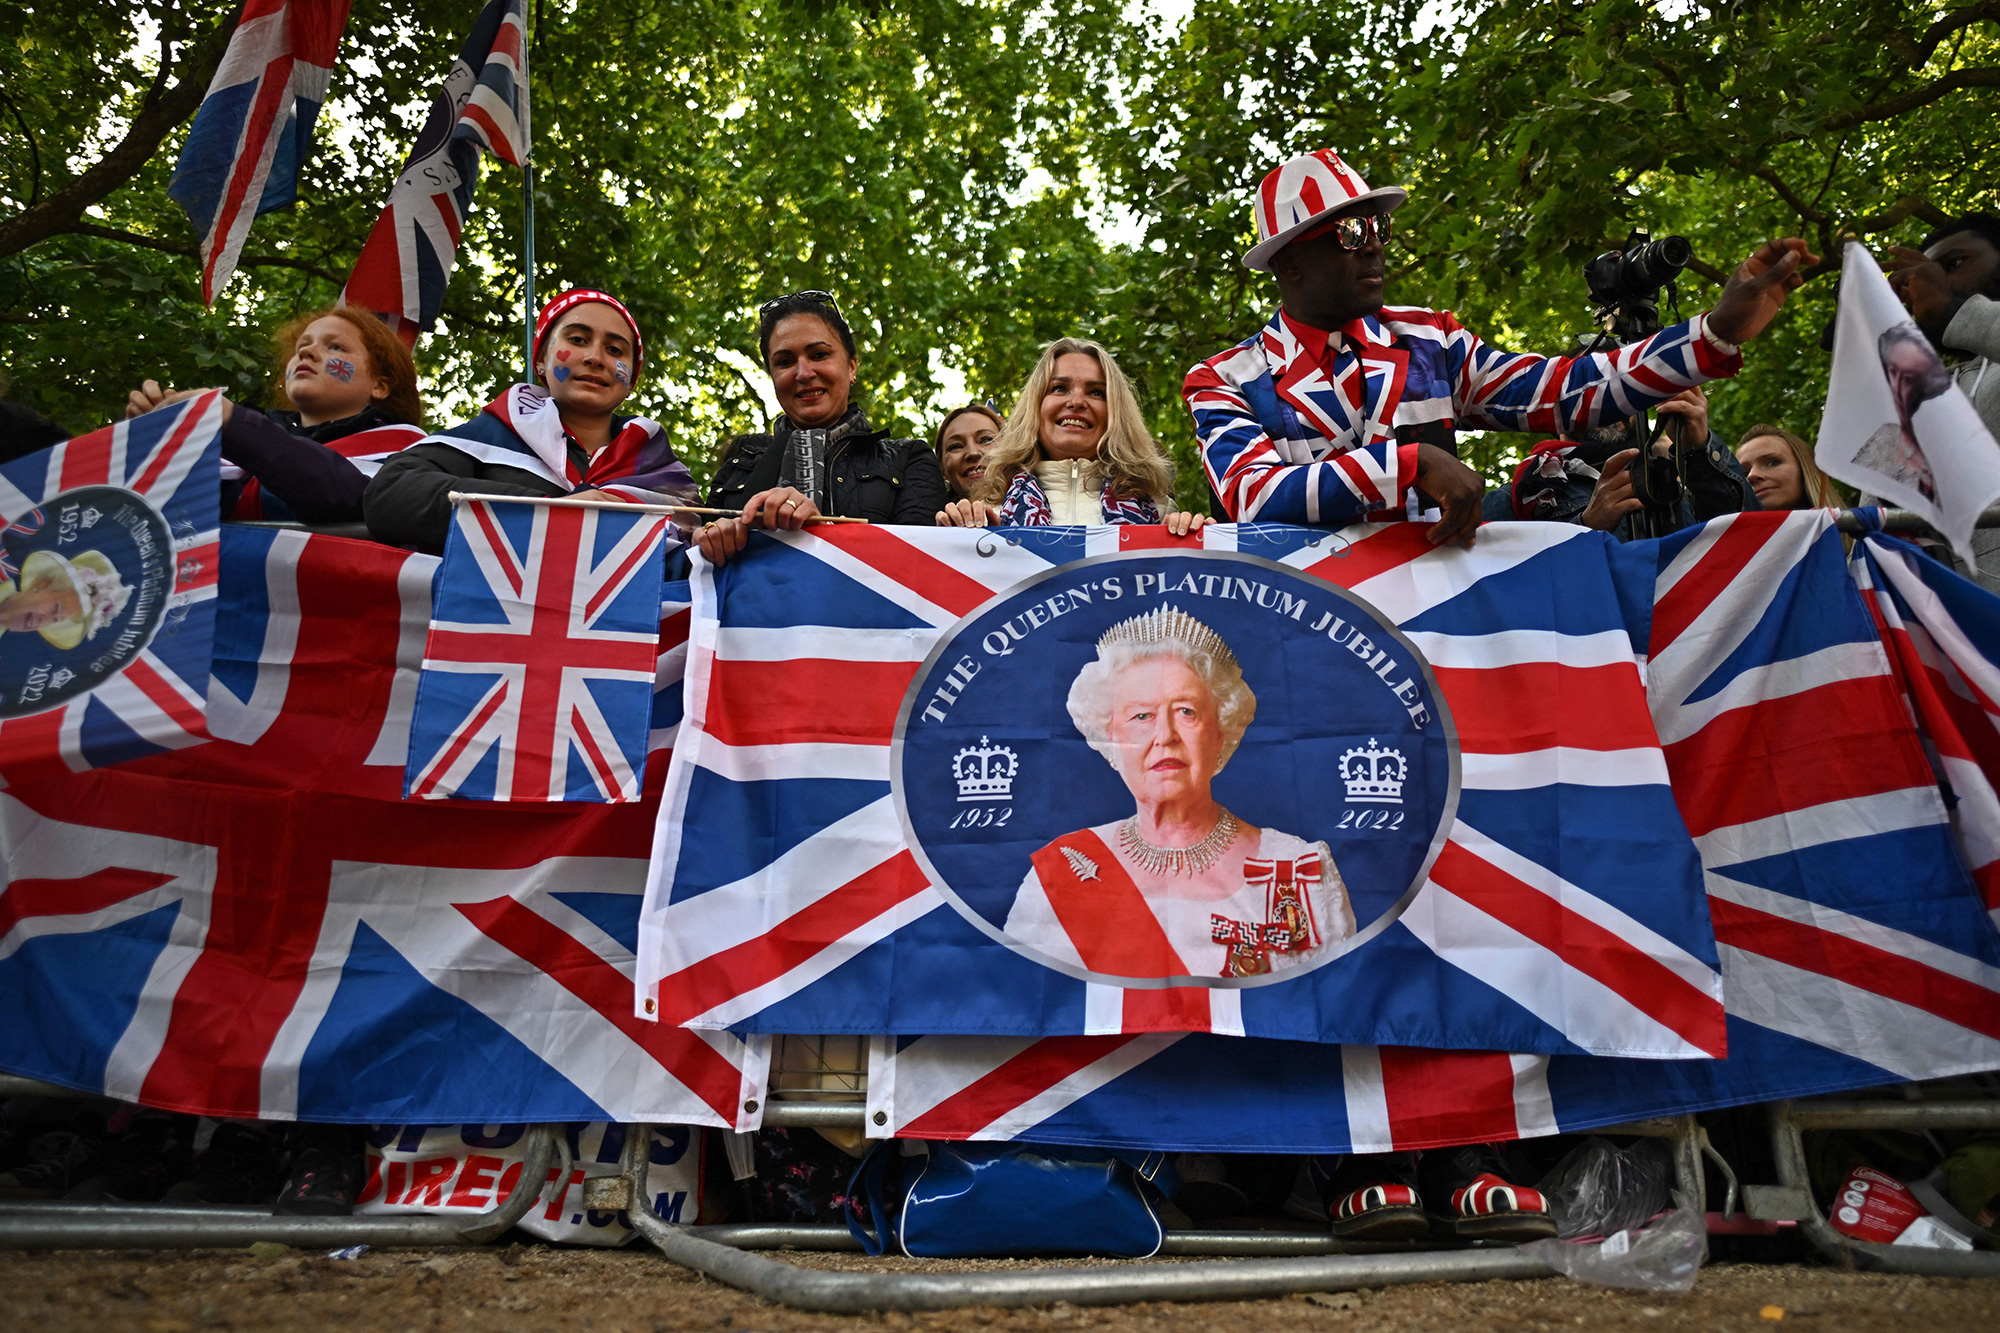 Huge crowds converged on central London for the start of four days of public events to mark Queen Elizabeth II's historic Platinum Jubilee on June 2.